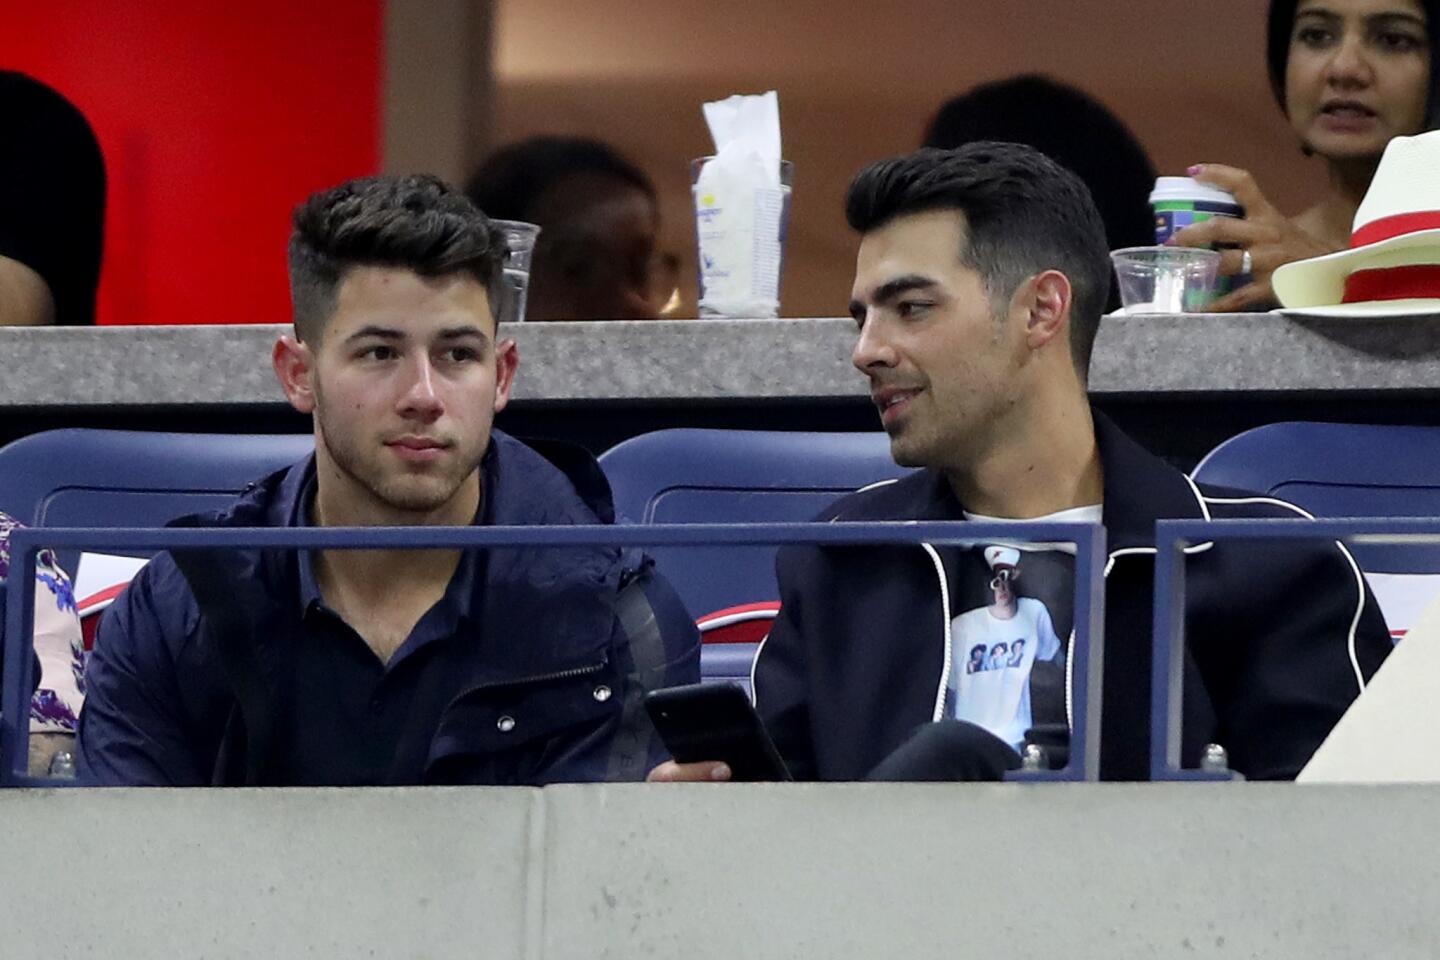 Nick Jonas (l.) and Joe Jonas attend day 12 of the 2019 US Open at the USTA Billie Jean King National Tennis Center on Sept. 6, 2019 in Queens, New York.